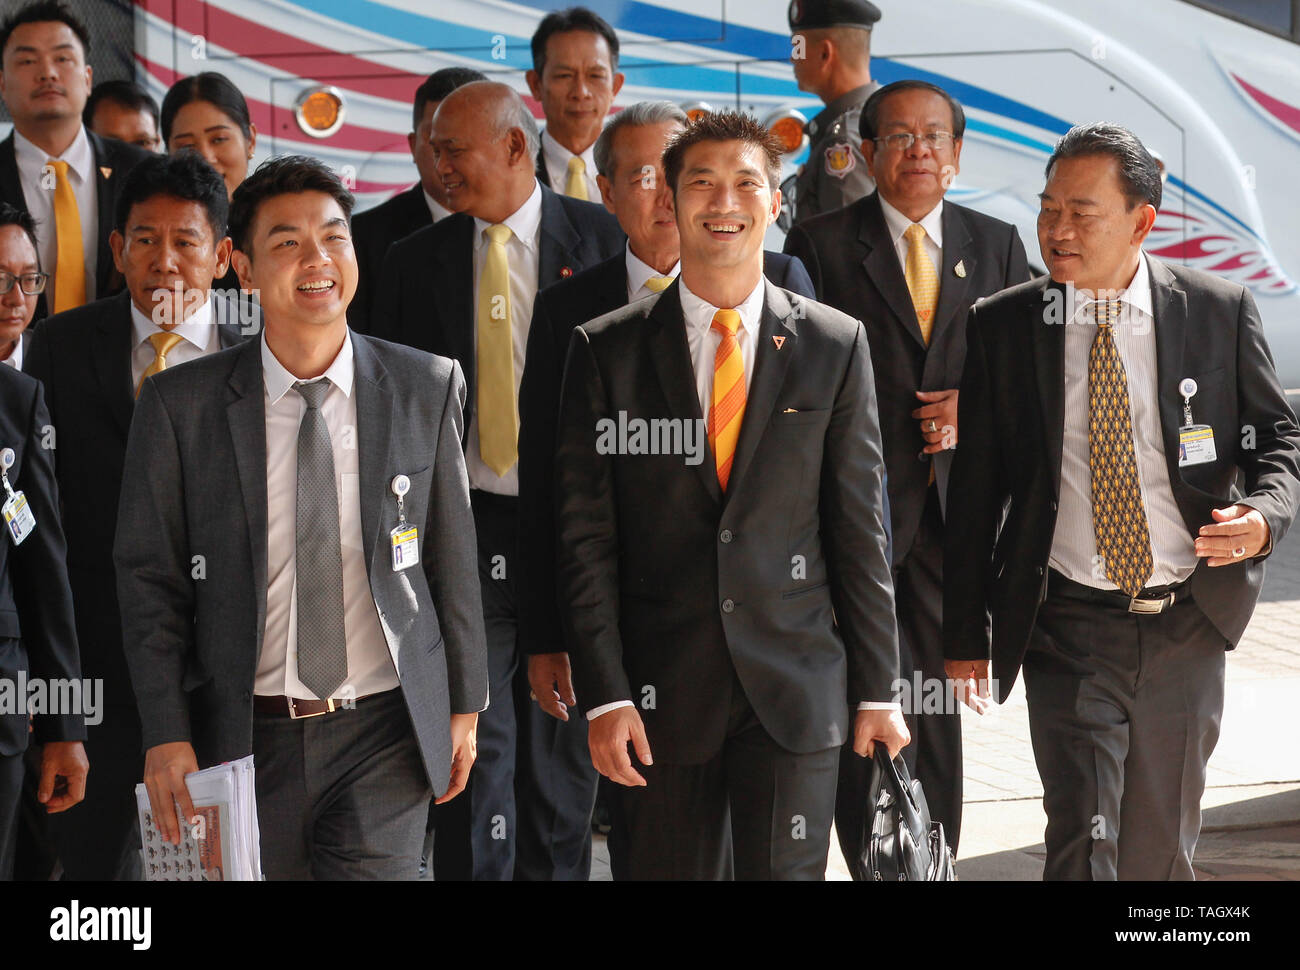 Thanathorn Juangroongruangkit and his party members seen arriving at the TOT Plc’ auditorium in Bangkok. Thanathorn Juangroongruangkit, the Future Forward Party leader has now officially discontinued indefinitely his MP duty by the order of the Constitutional Court after Thanathorn may have breach the laws by still owning shares in a media company while being registering as an MP candidate. Stock Photo